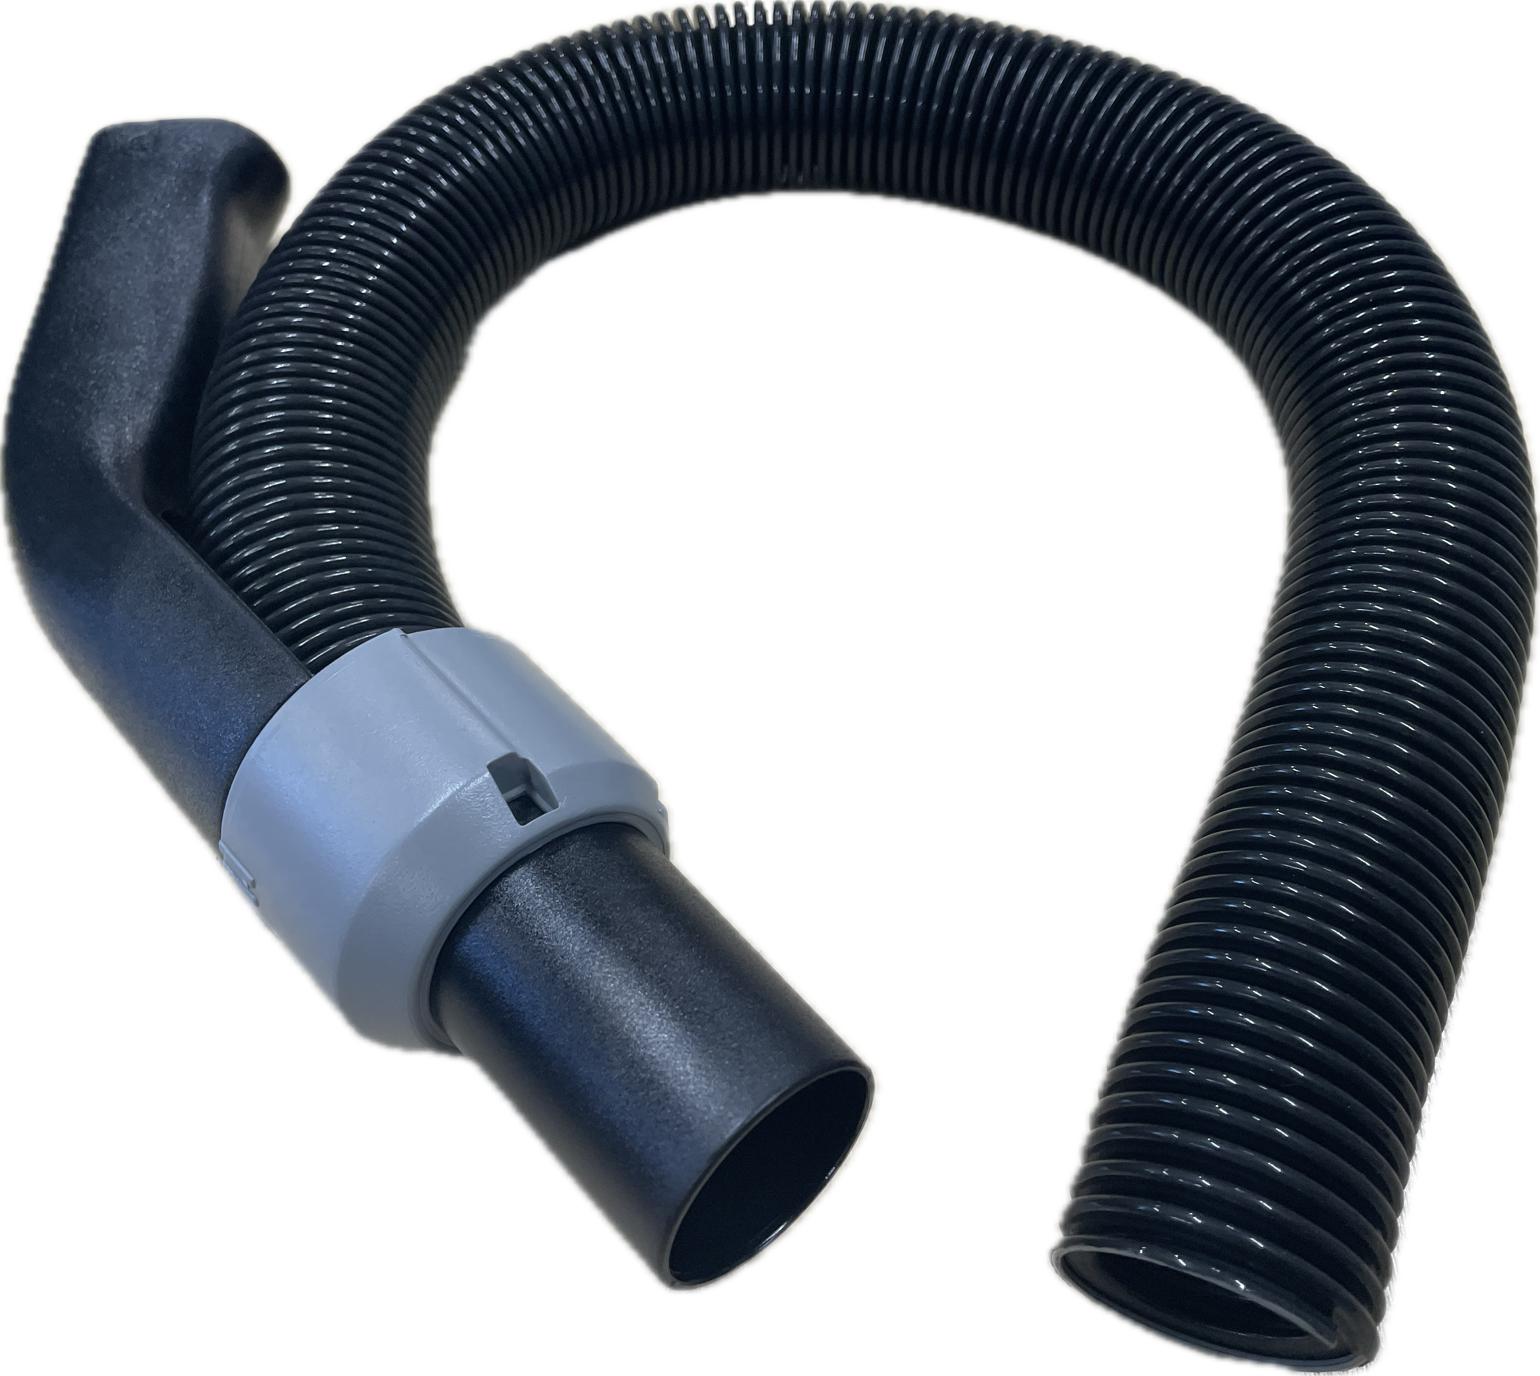 Lindhaus 181460381 - DYNAMIC Eco FORCE – No. 37 – EXTENSION HOSE WITH HANDLE